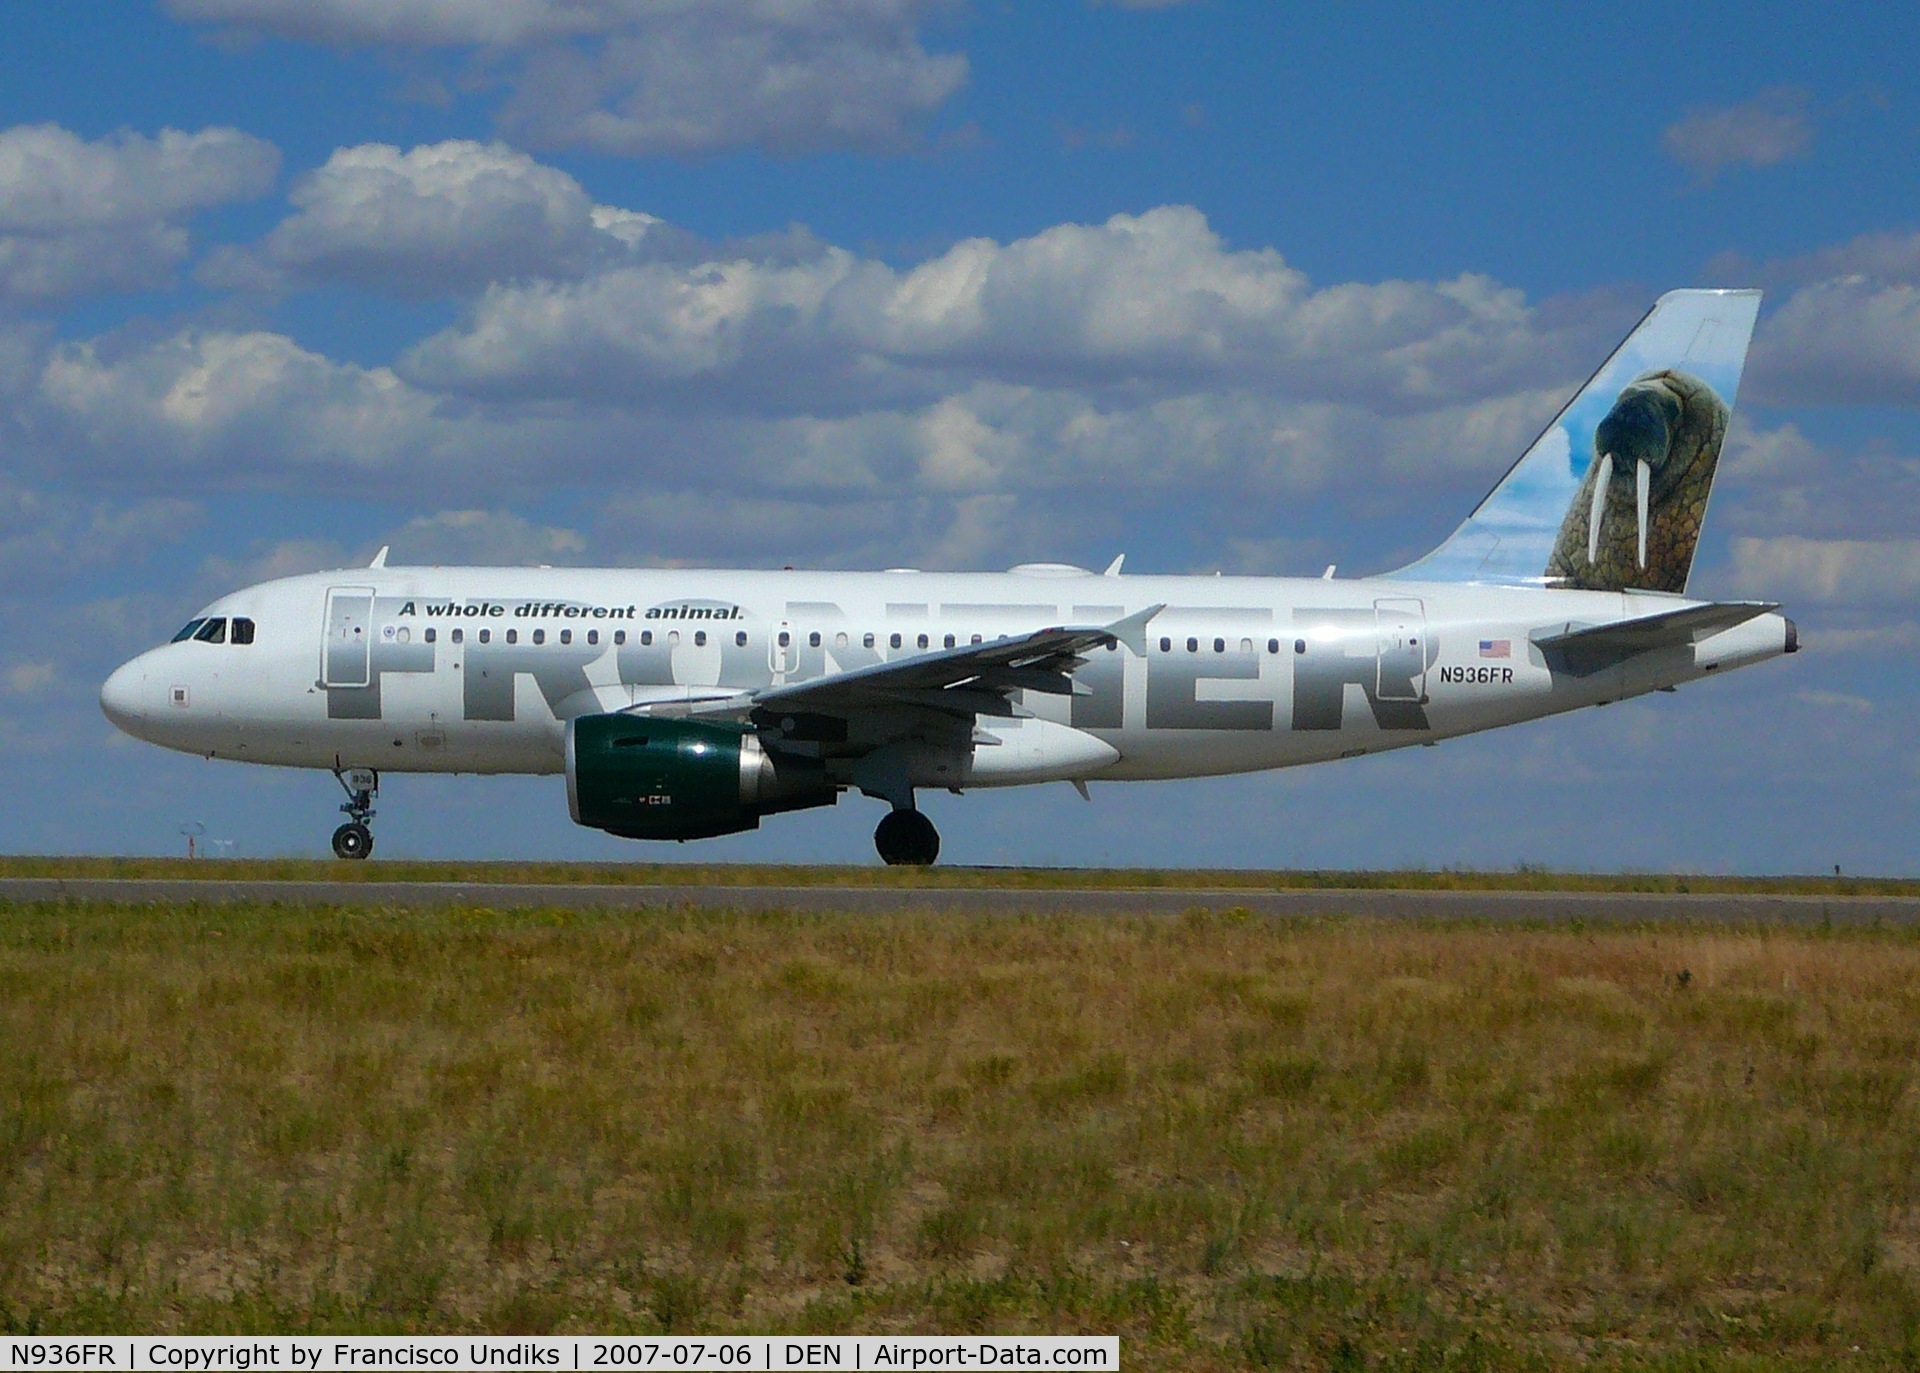 N936FR, 2005 Airbus A319-111 C/N 2392, Frontier Airlines Earl the Walrus.